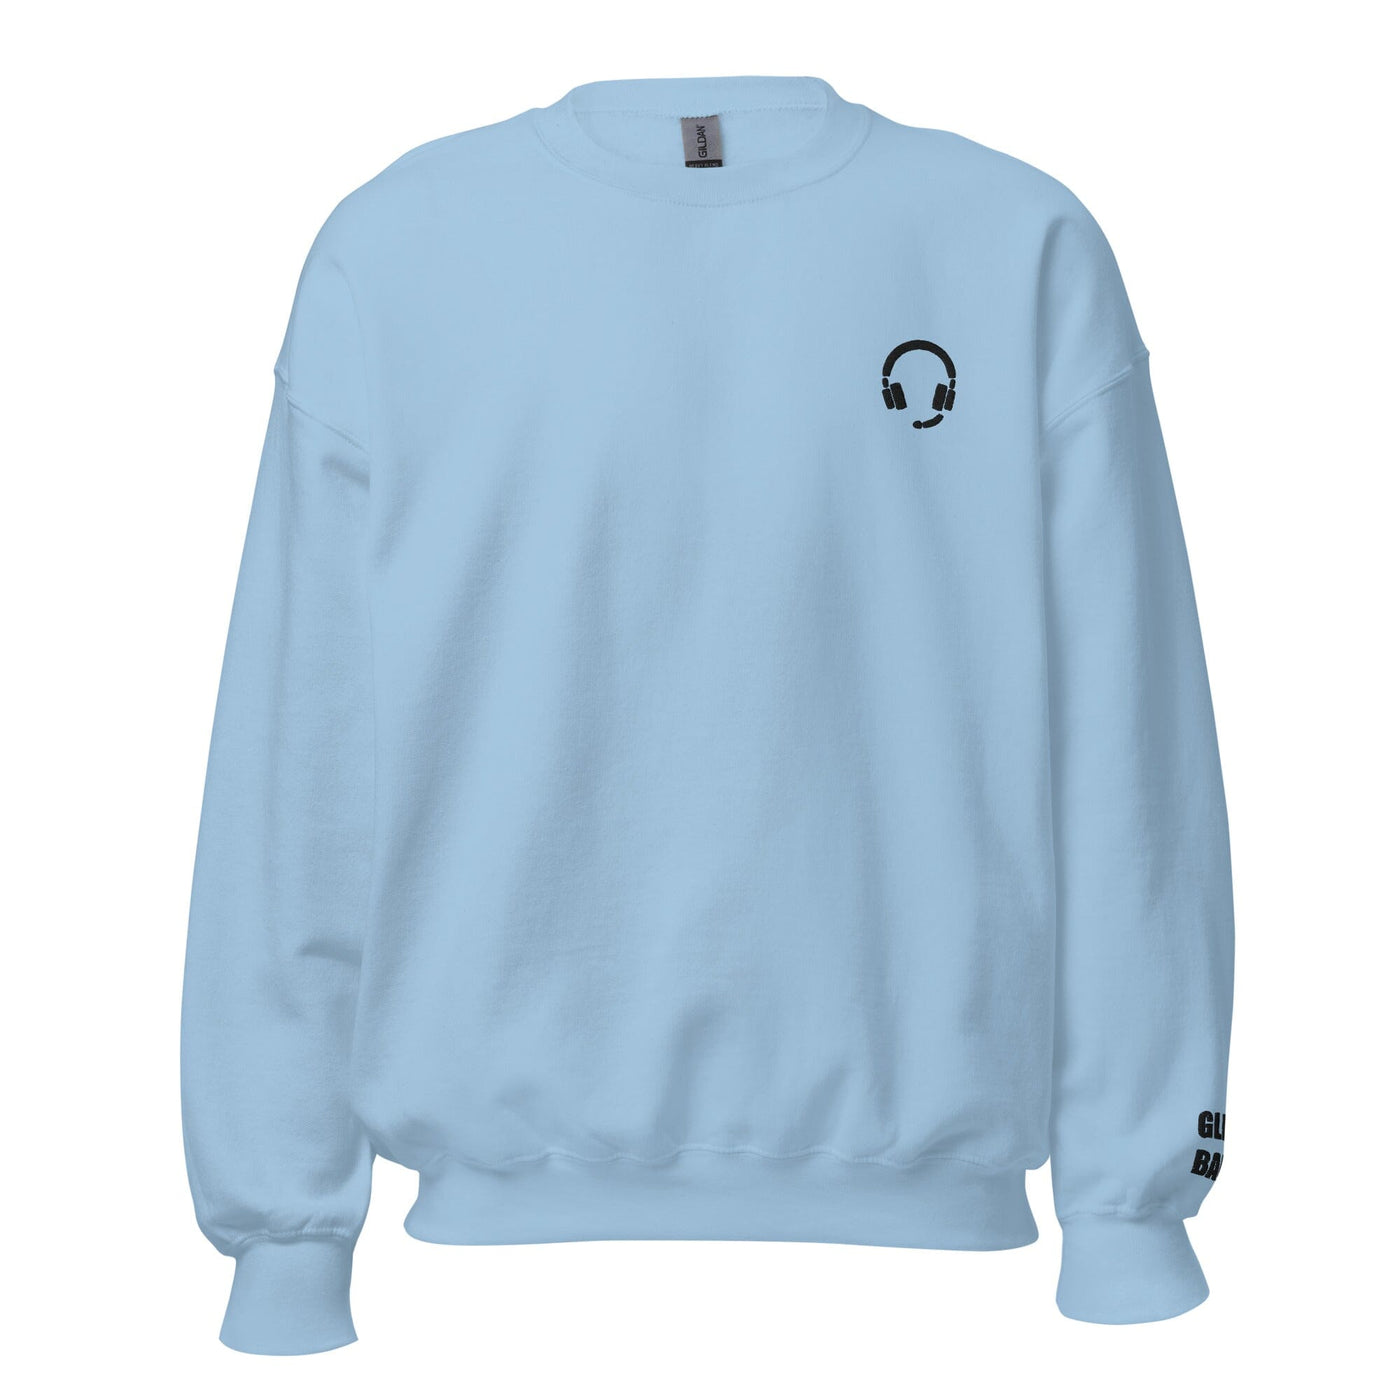 GLHF, Babe | Embroidered Unisex Sweatshirt | Gamer Affirmations Threads & Thistles Inventory Light Blue S 